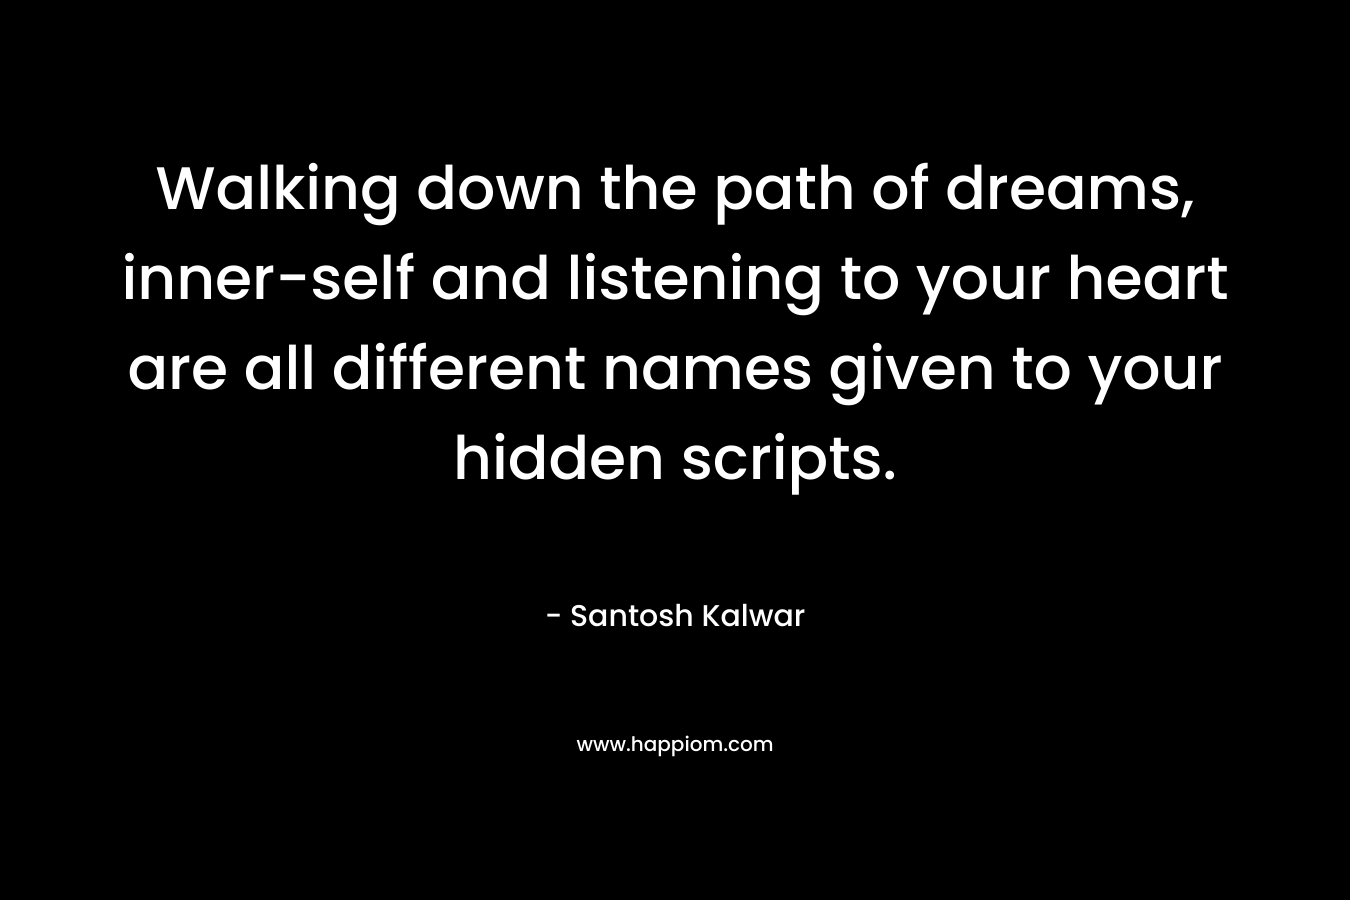 Walking down the path of dreams, inner-self and listening to your heart are all different names given to your hidden scripts. 